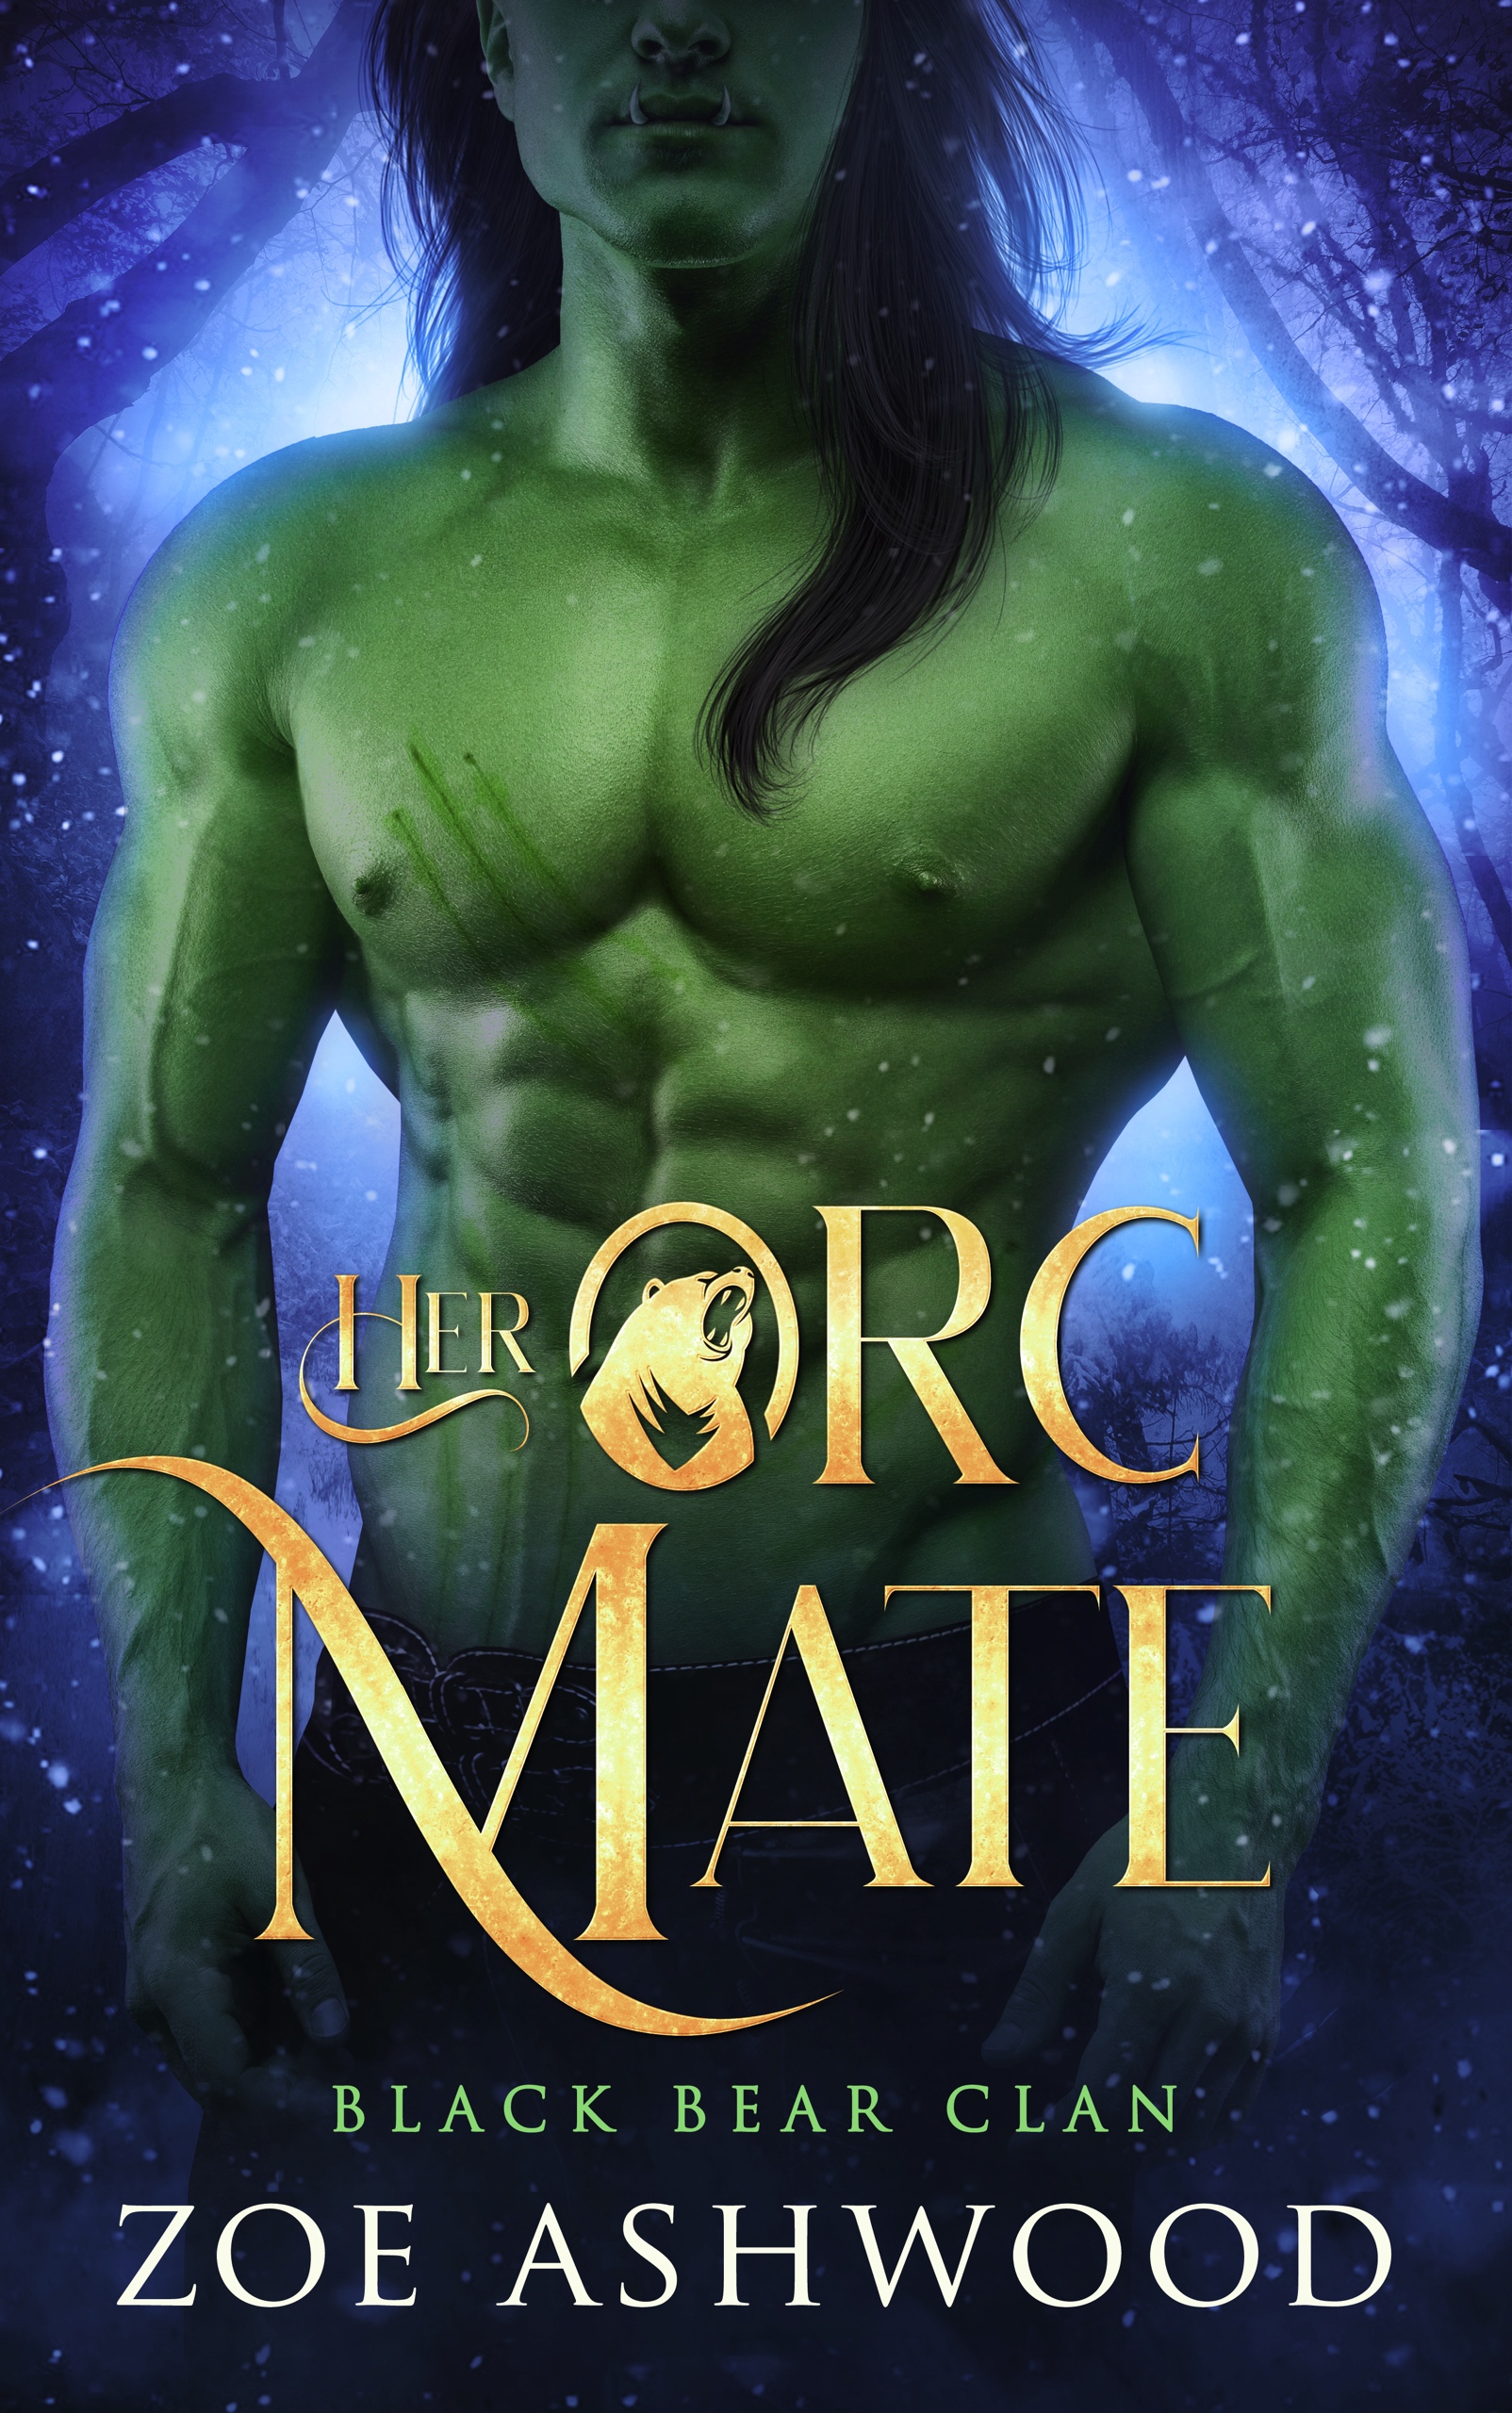 Her Orc Mate by Zoe Ashwood - a monster fantasy romance